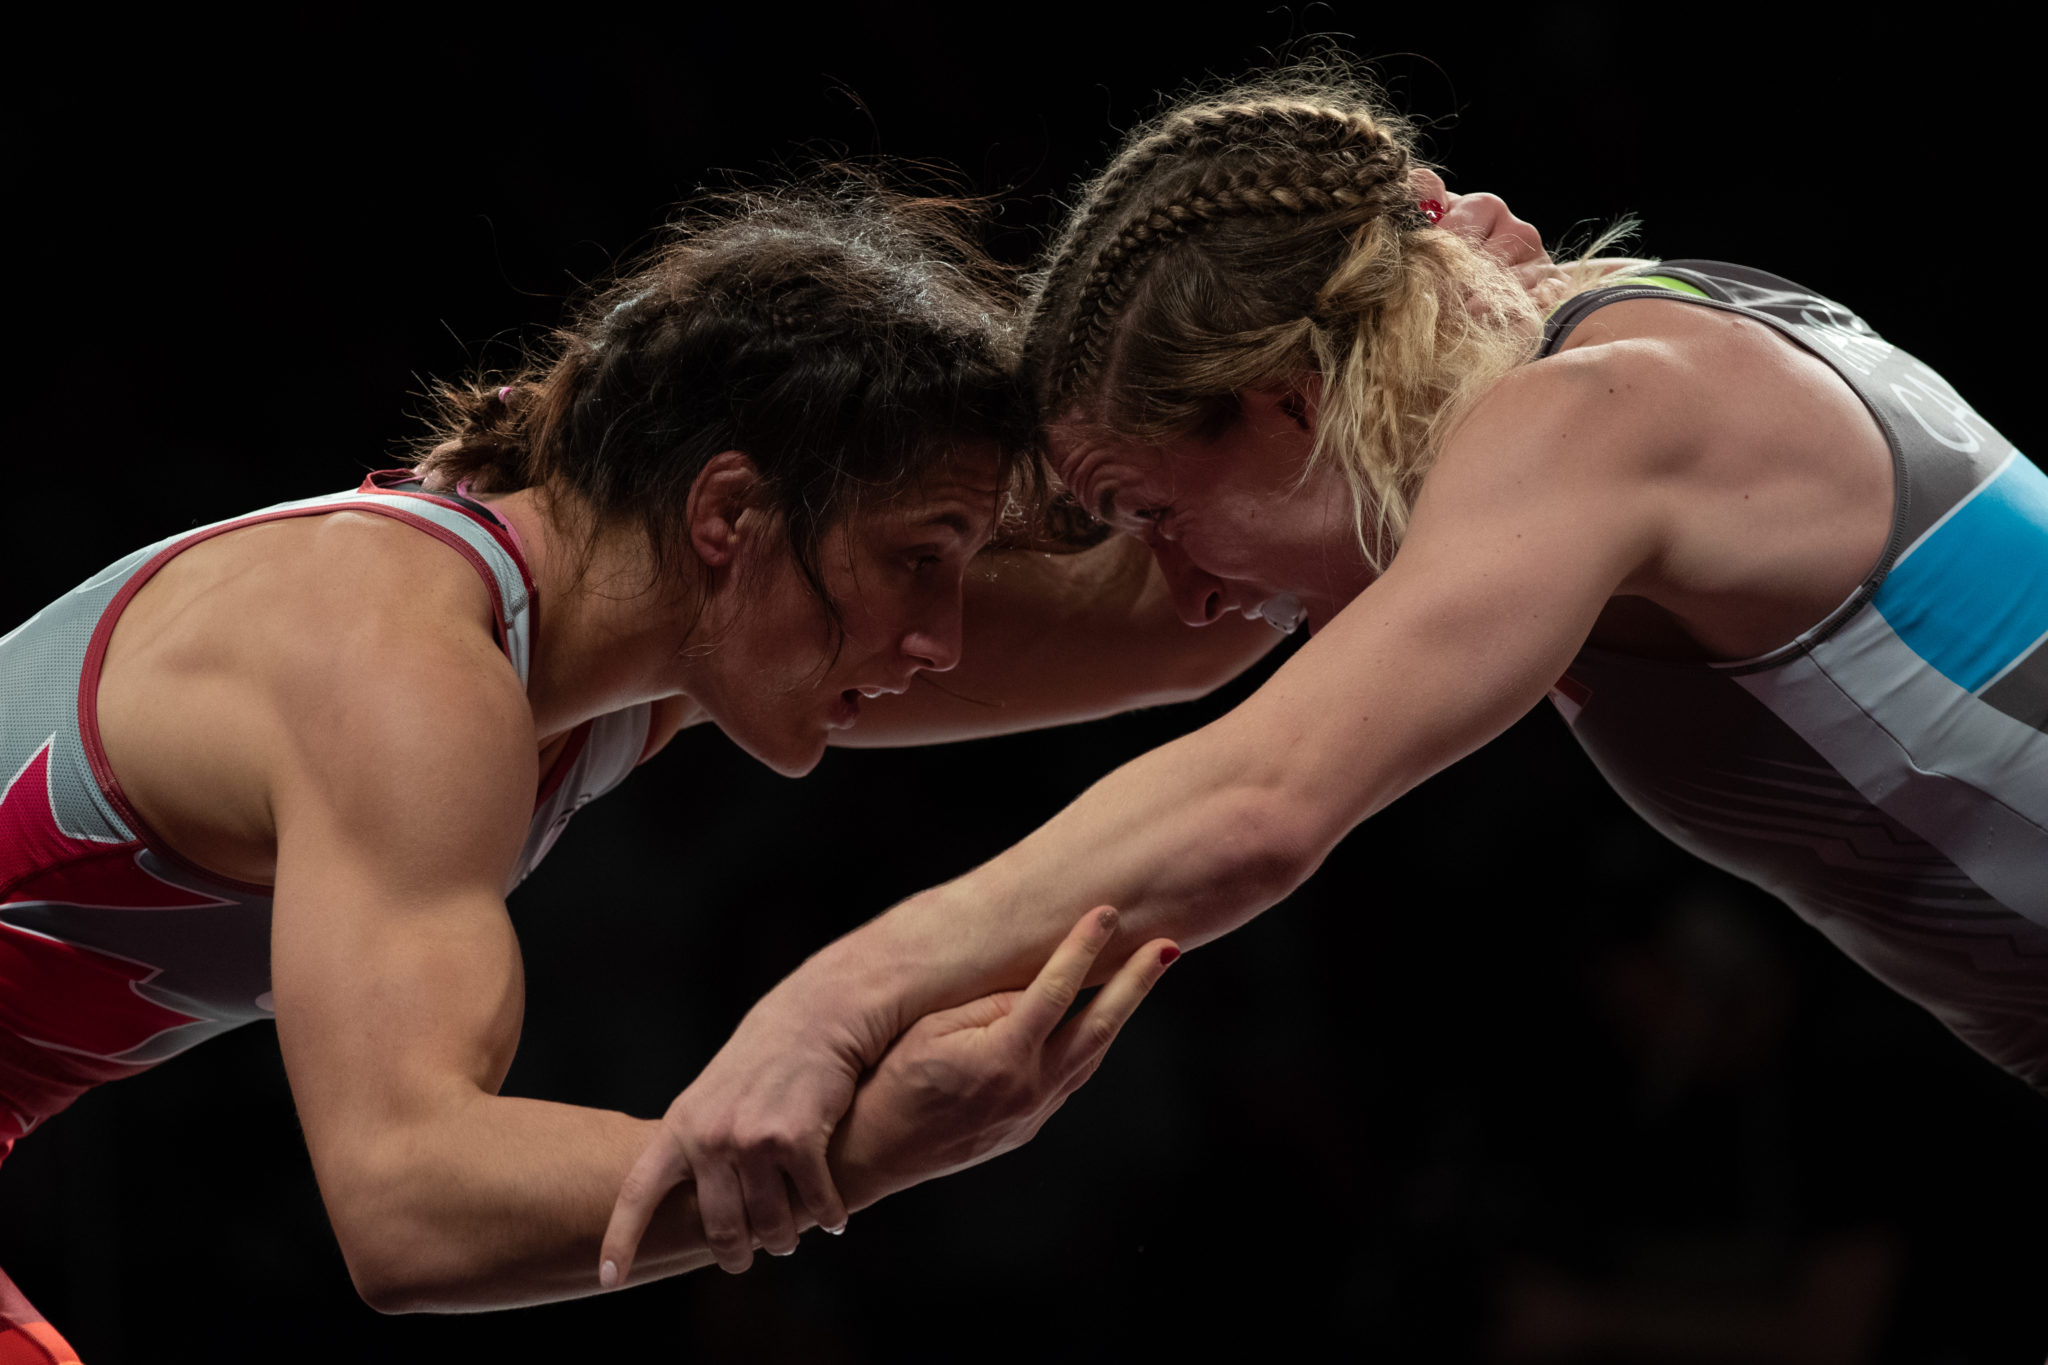 WCL seeks bids for 20222024 Canadian Wrestling Championships and